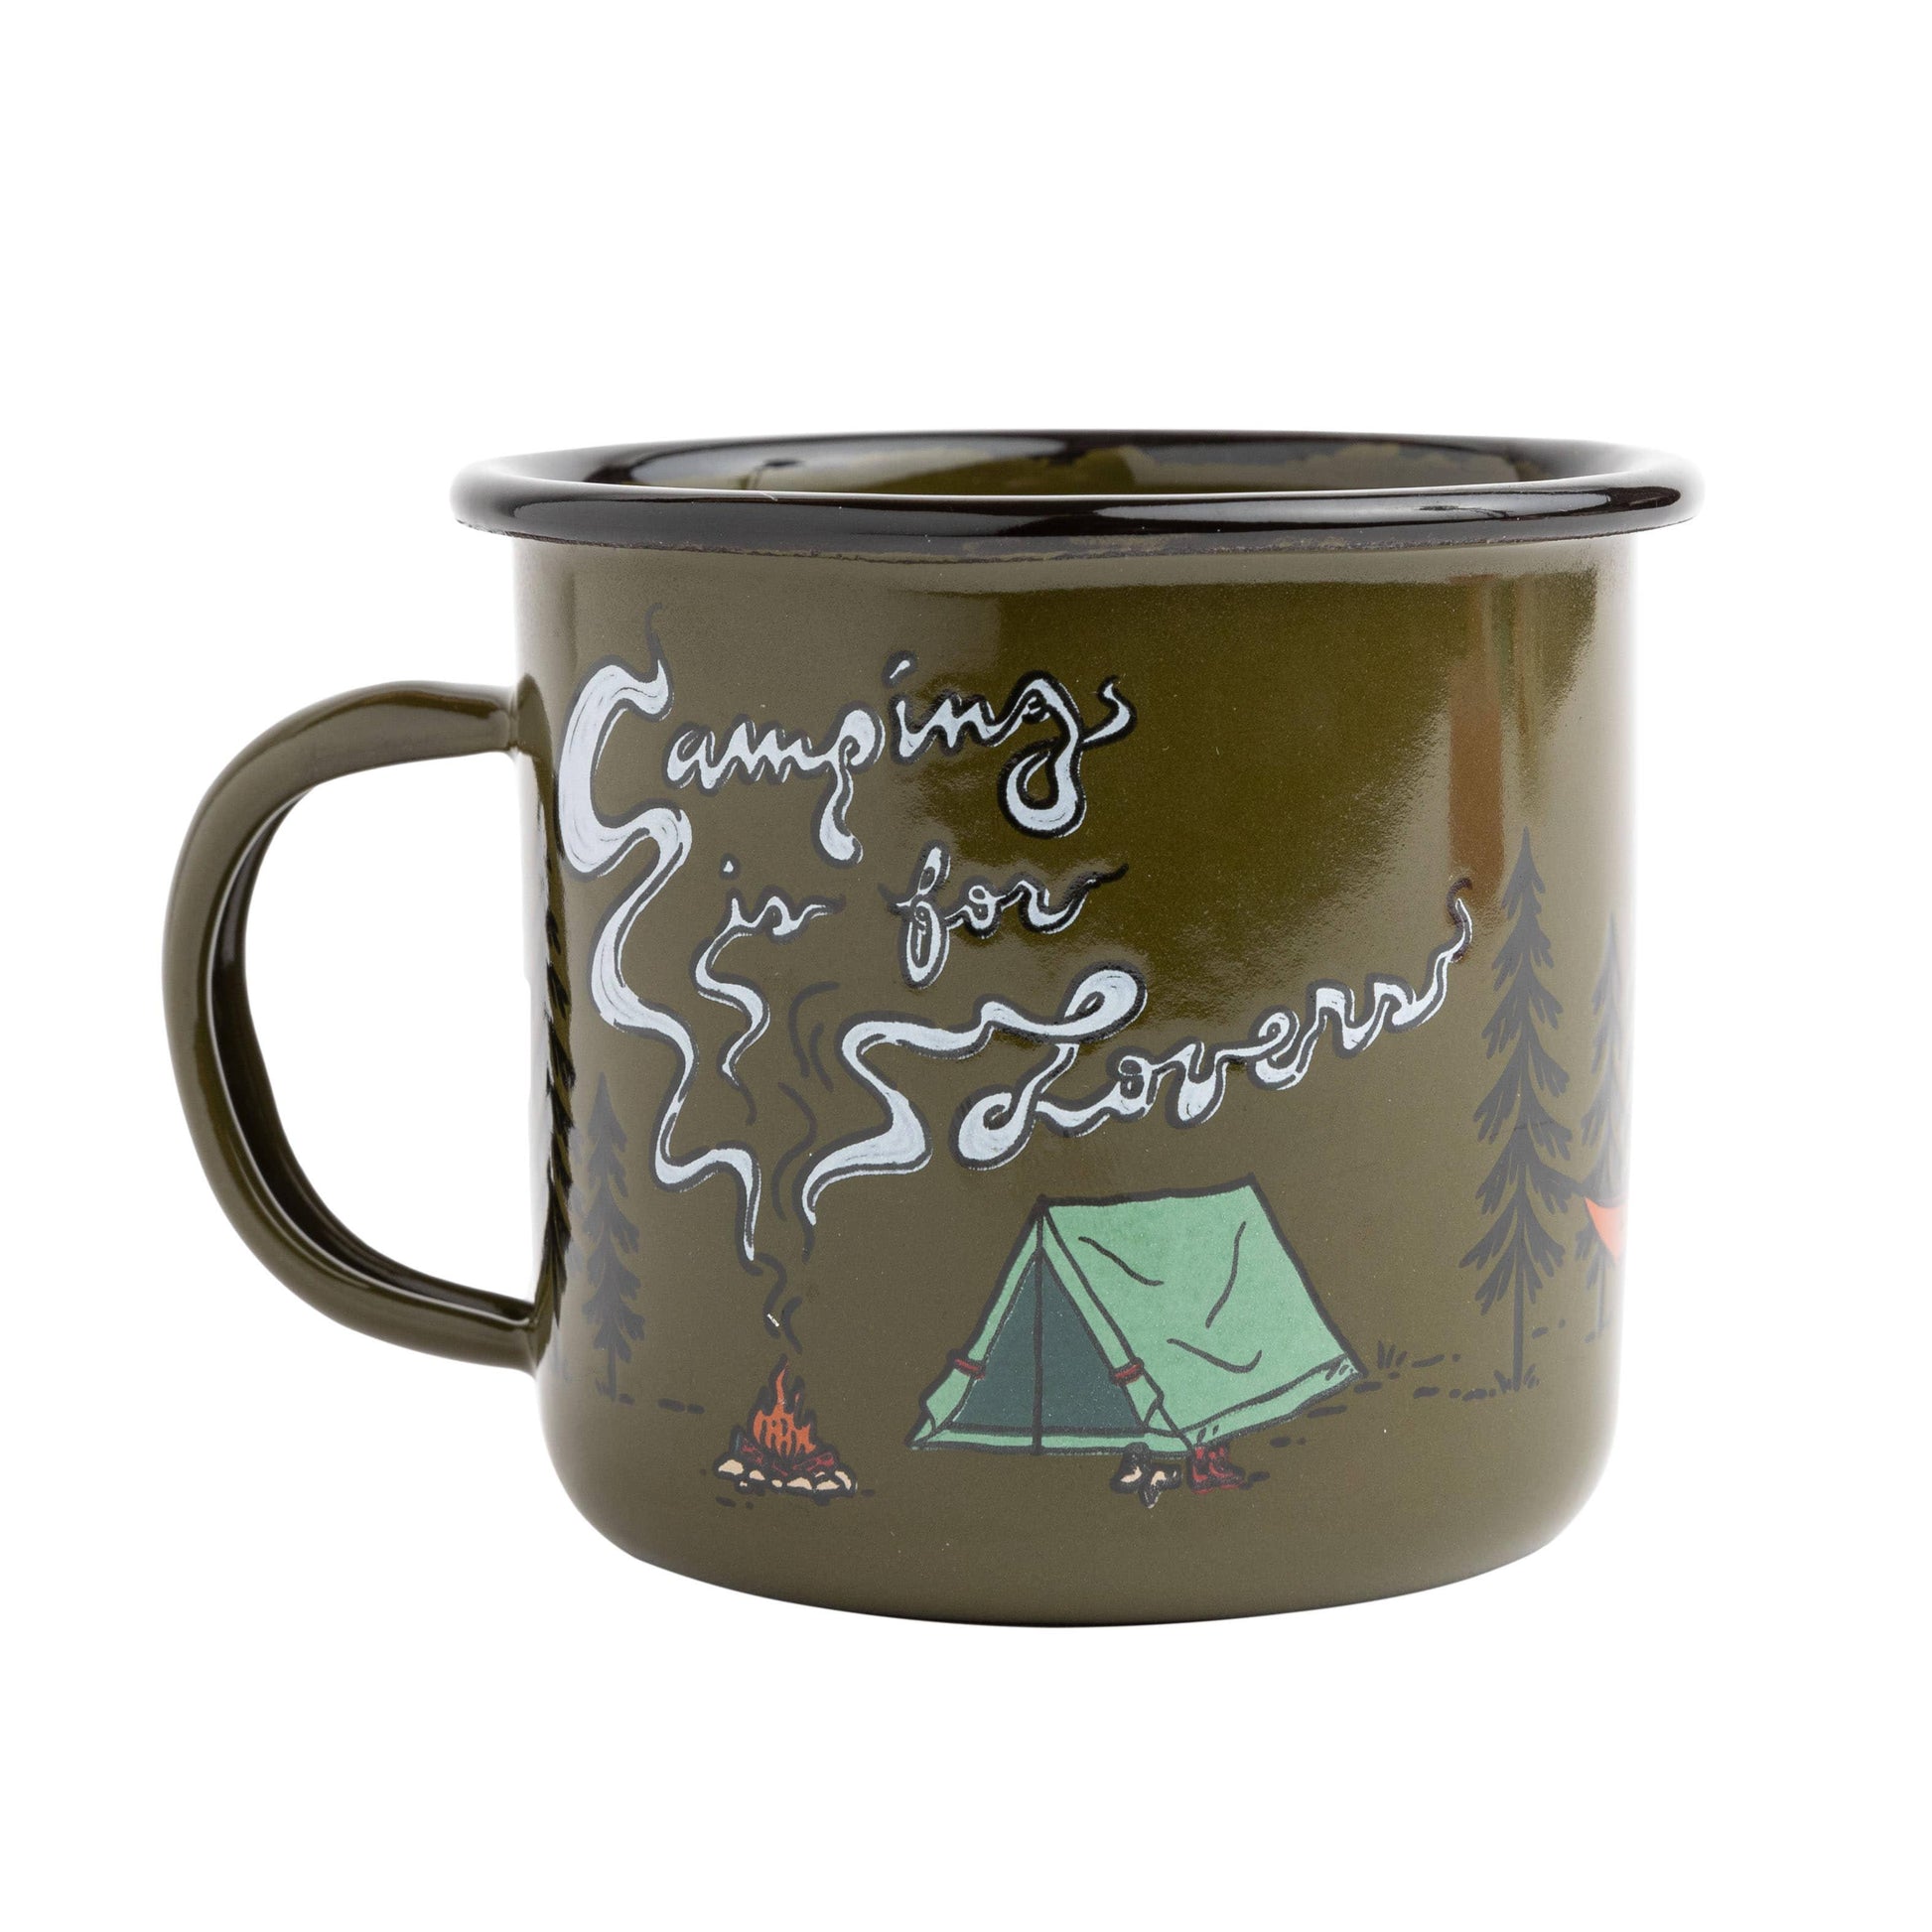 Learn Why Enamel Mugs Are Good for Camping